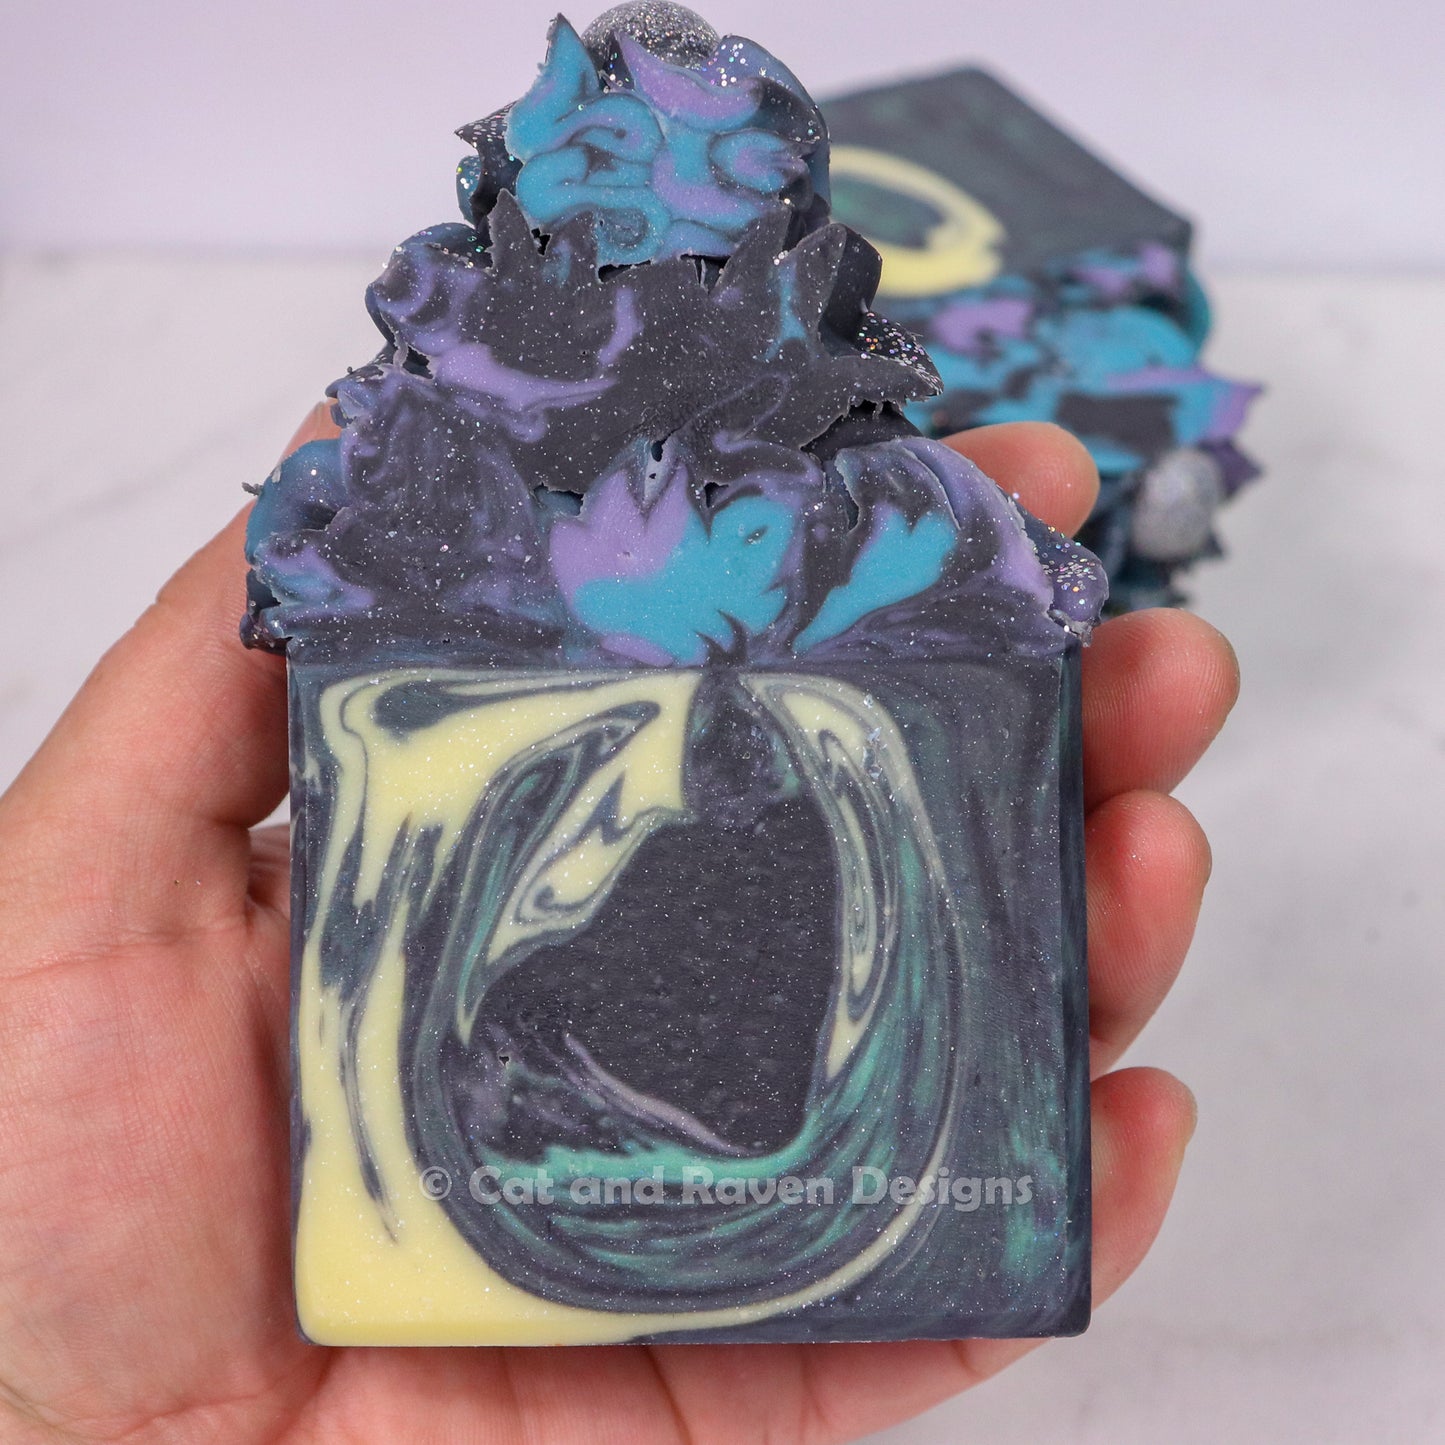 Glitter Bomb frosted soap